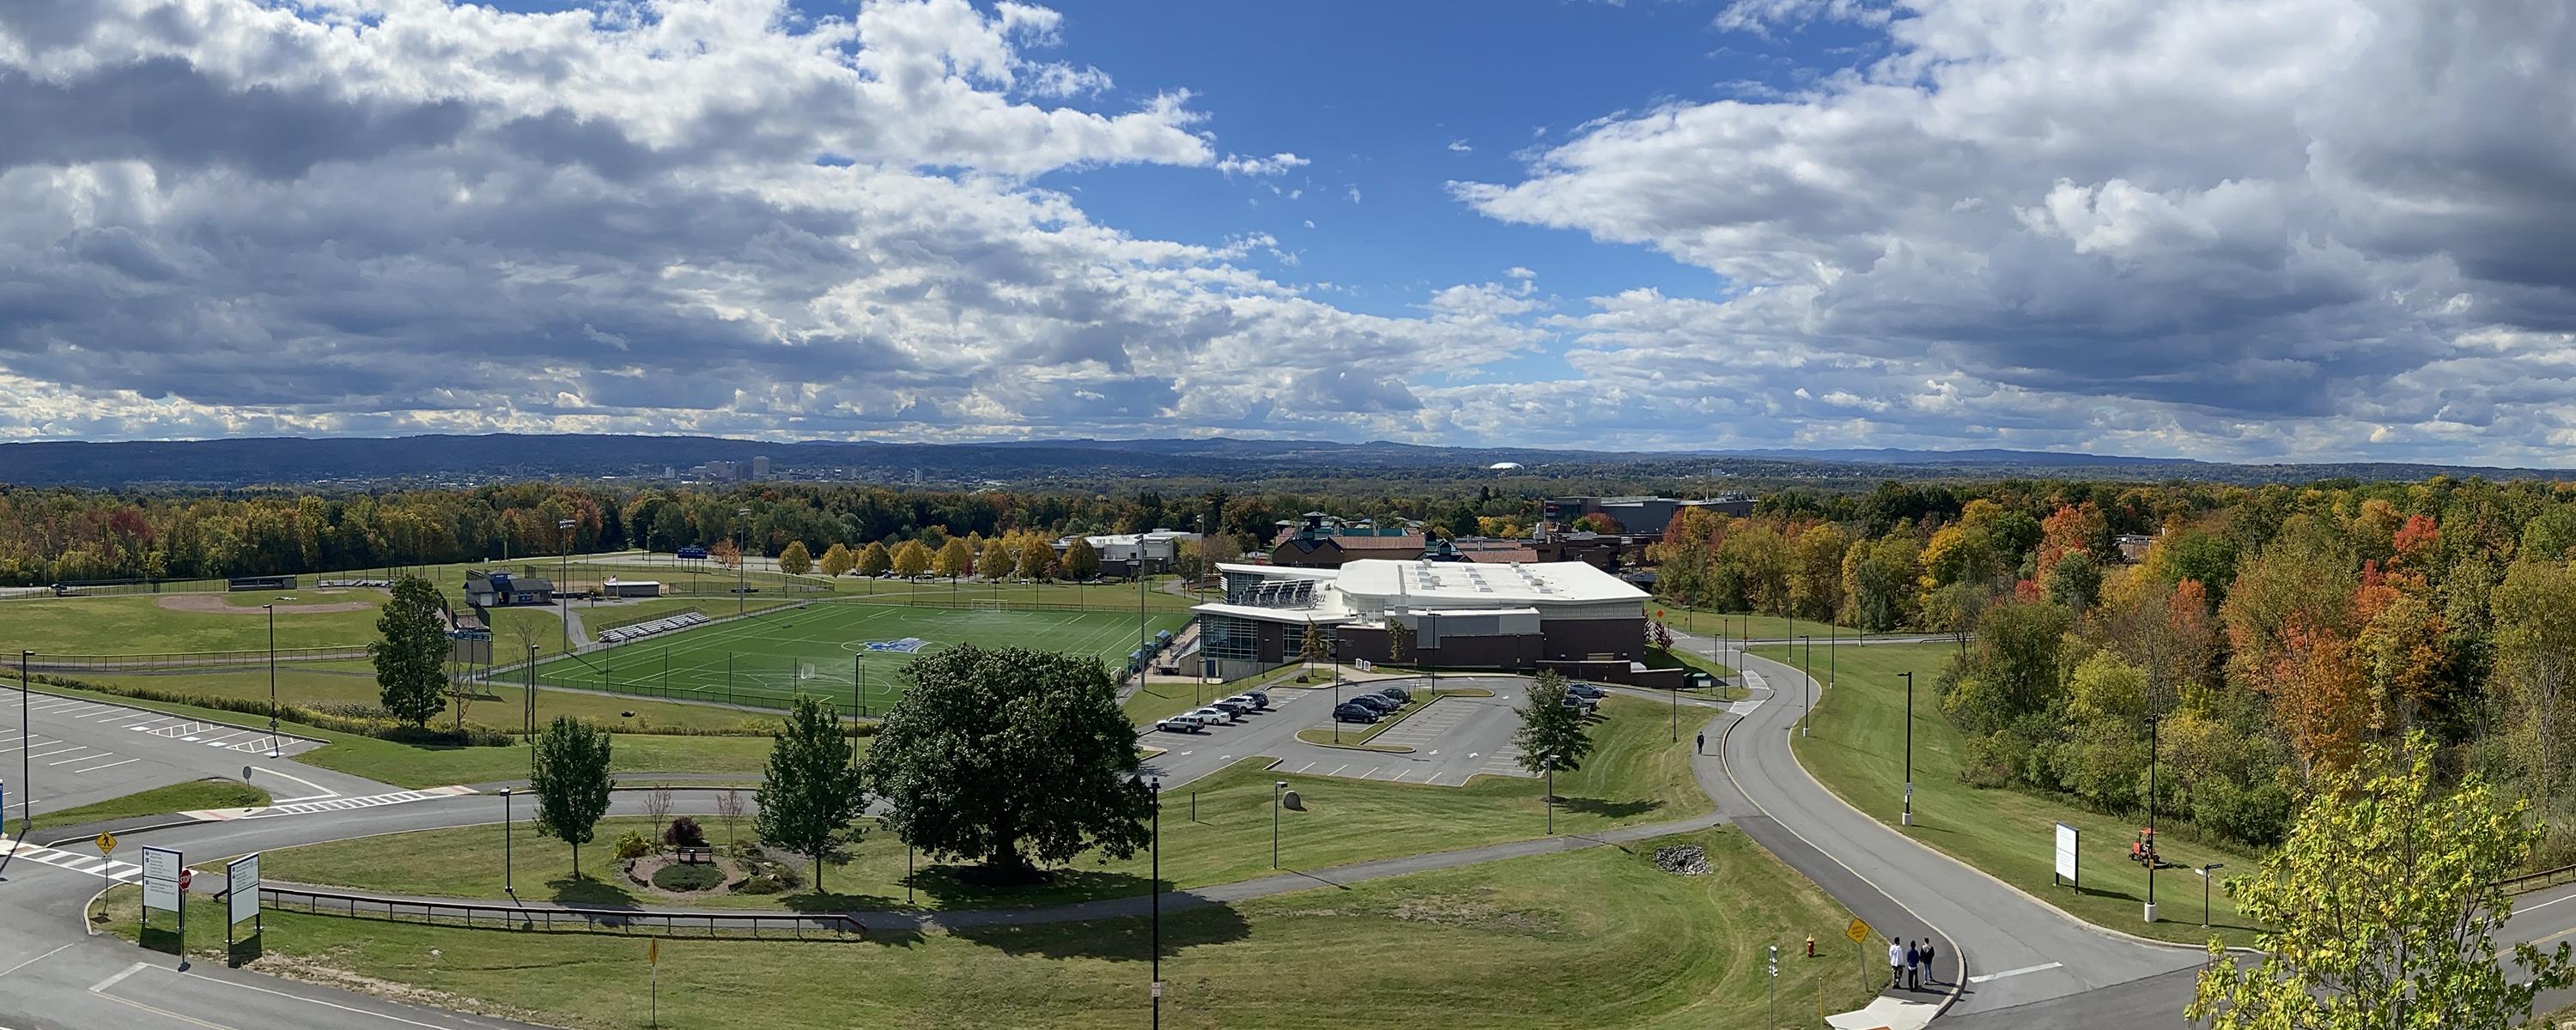 wide view of SUNY Poly's Utica campus